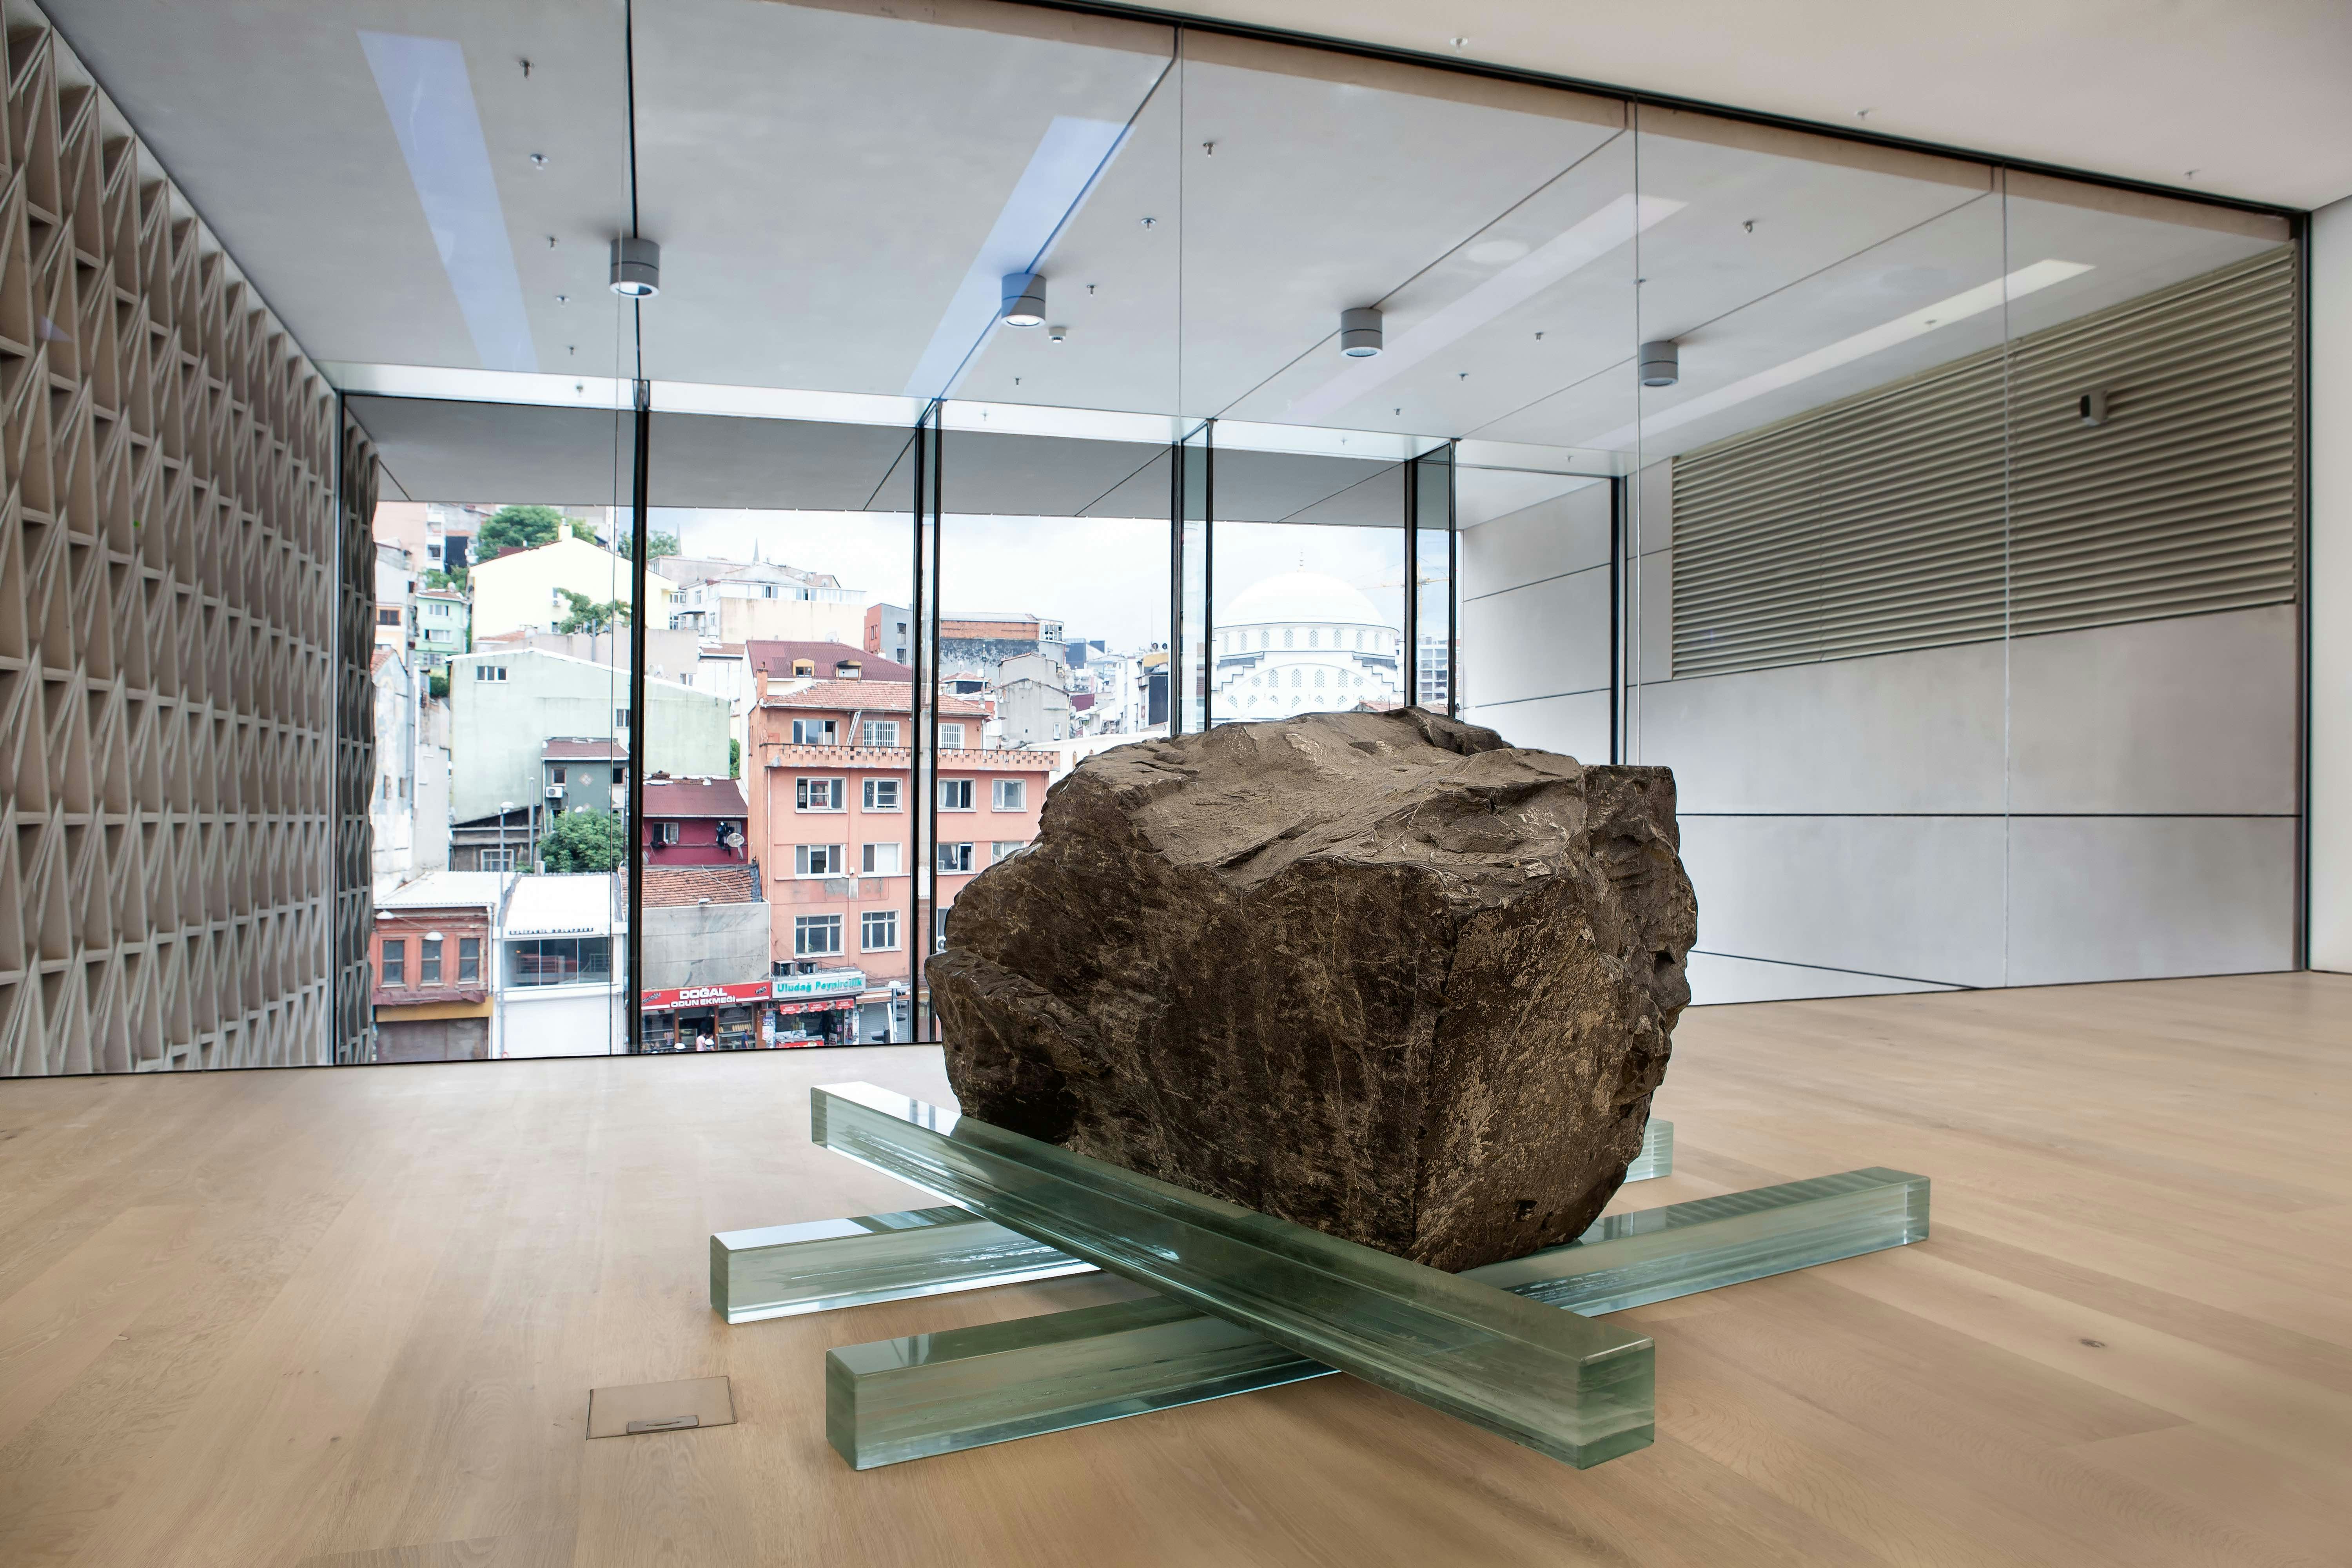 Large rock standing in exhibition space by window.jpg